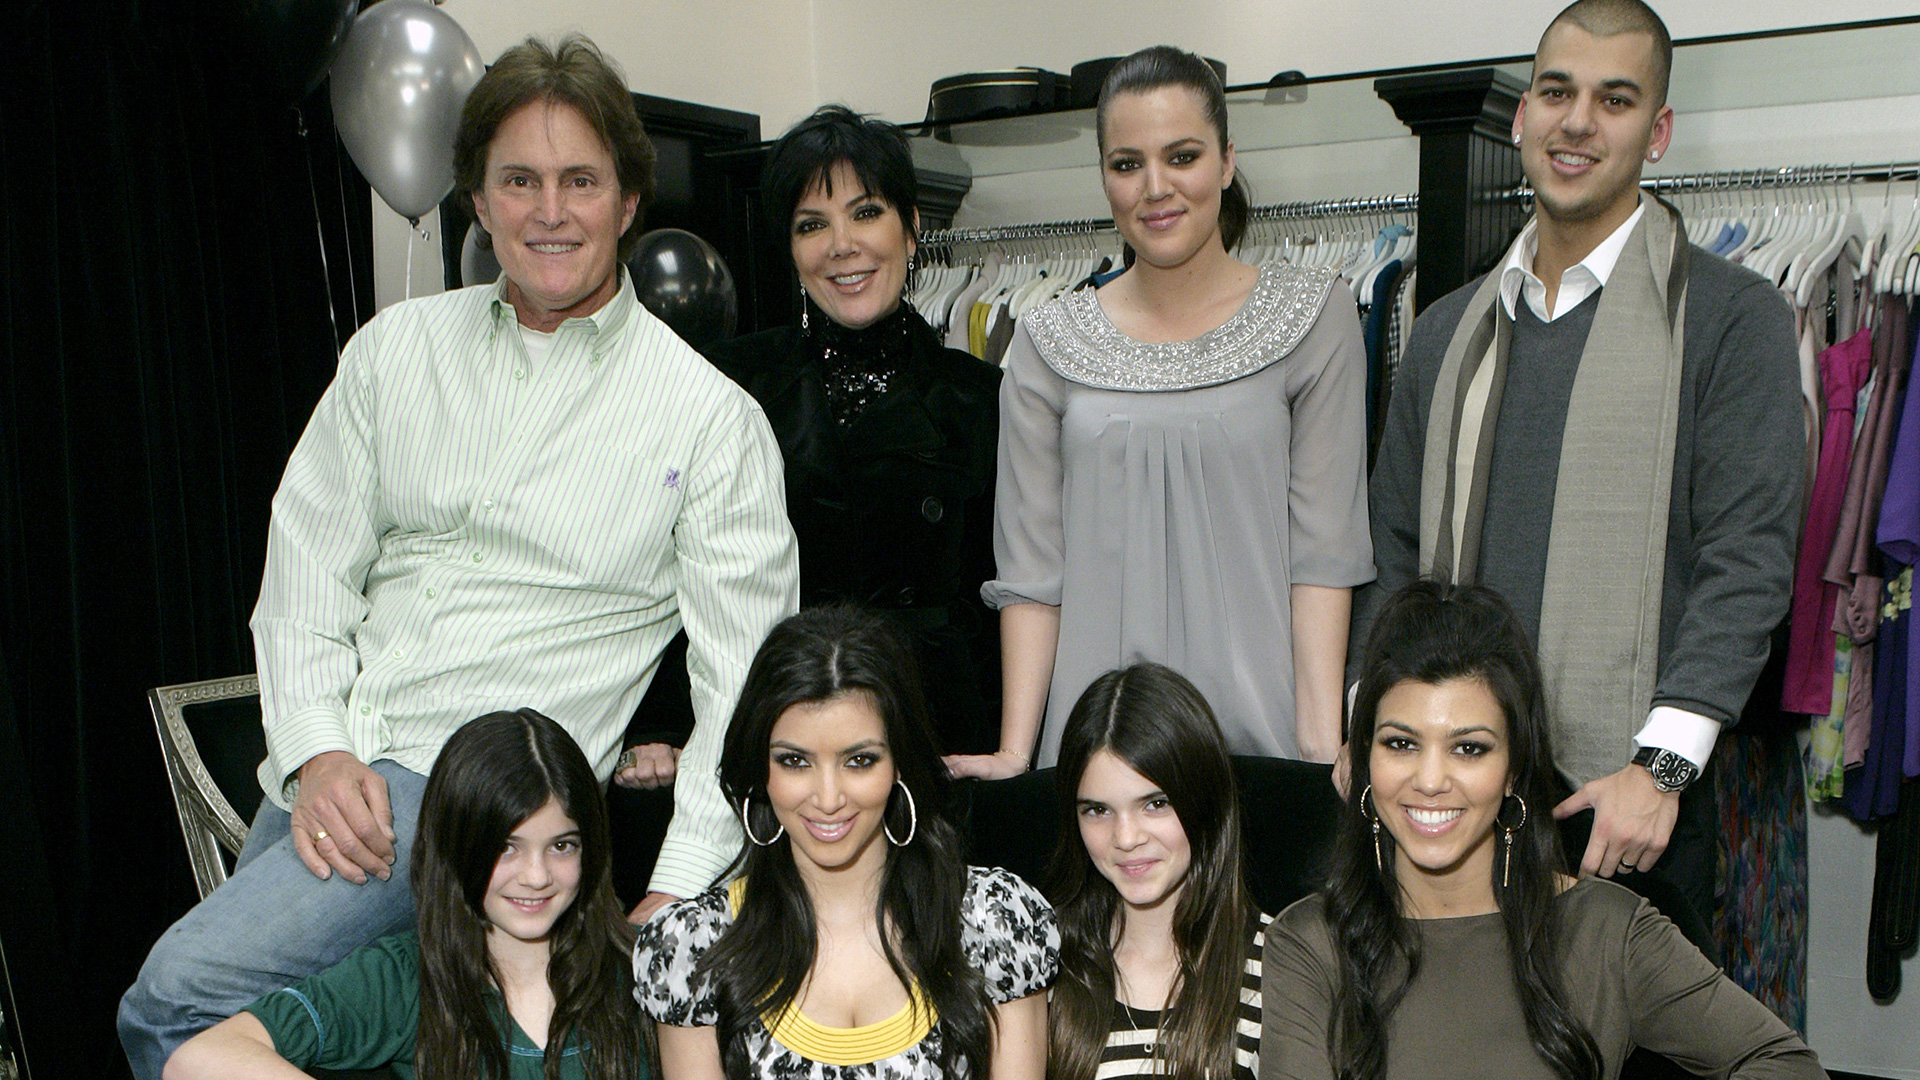 October 14, 2007: “Keeping Up With The Kardashians” Premiered on E!